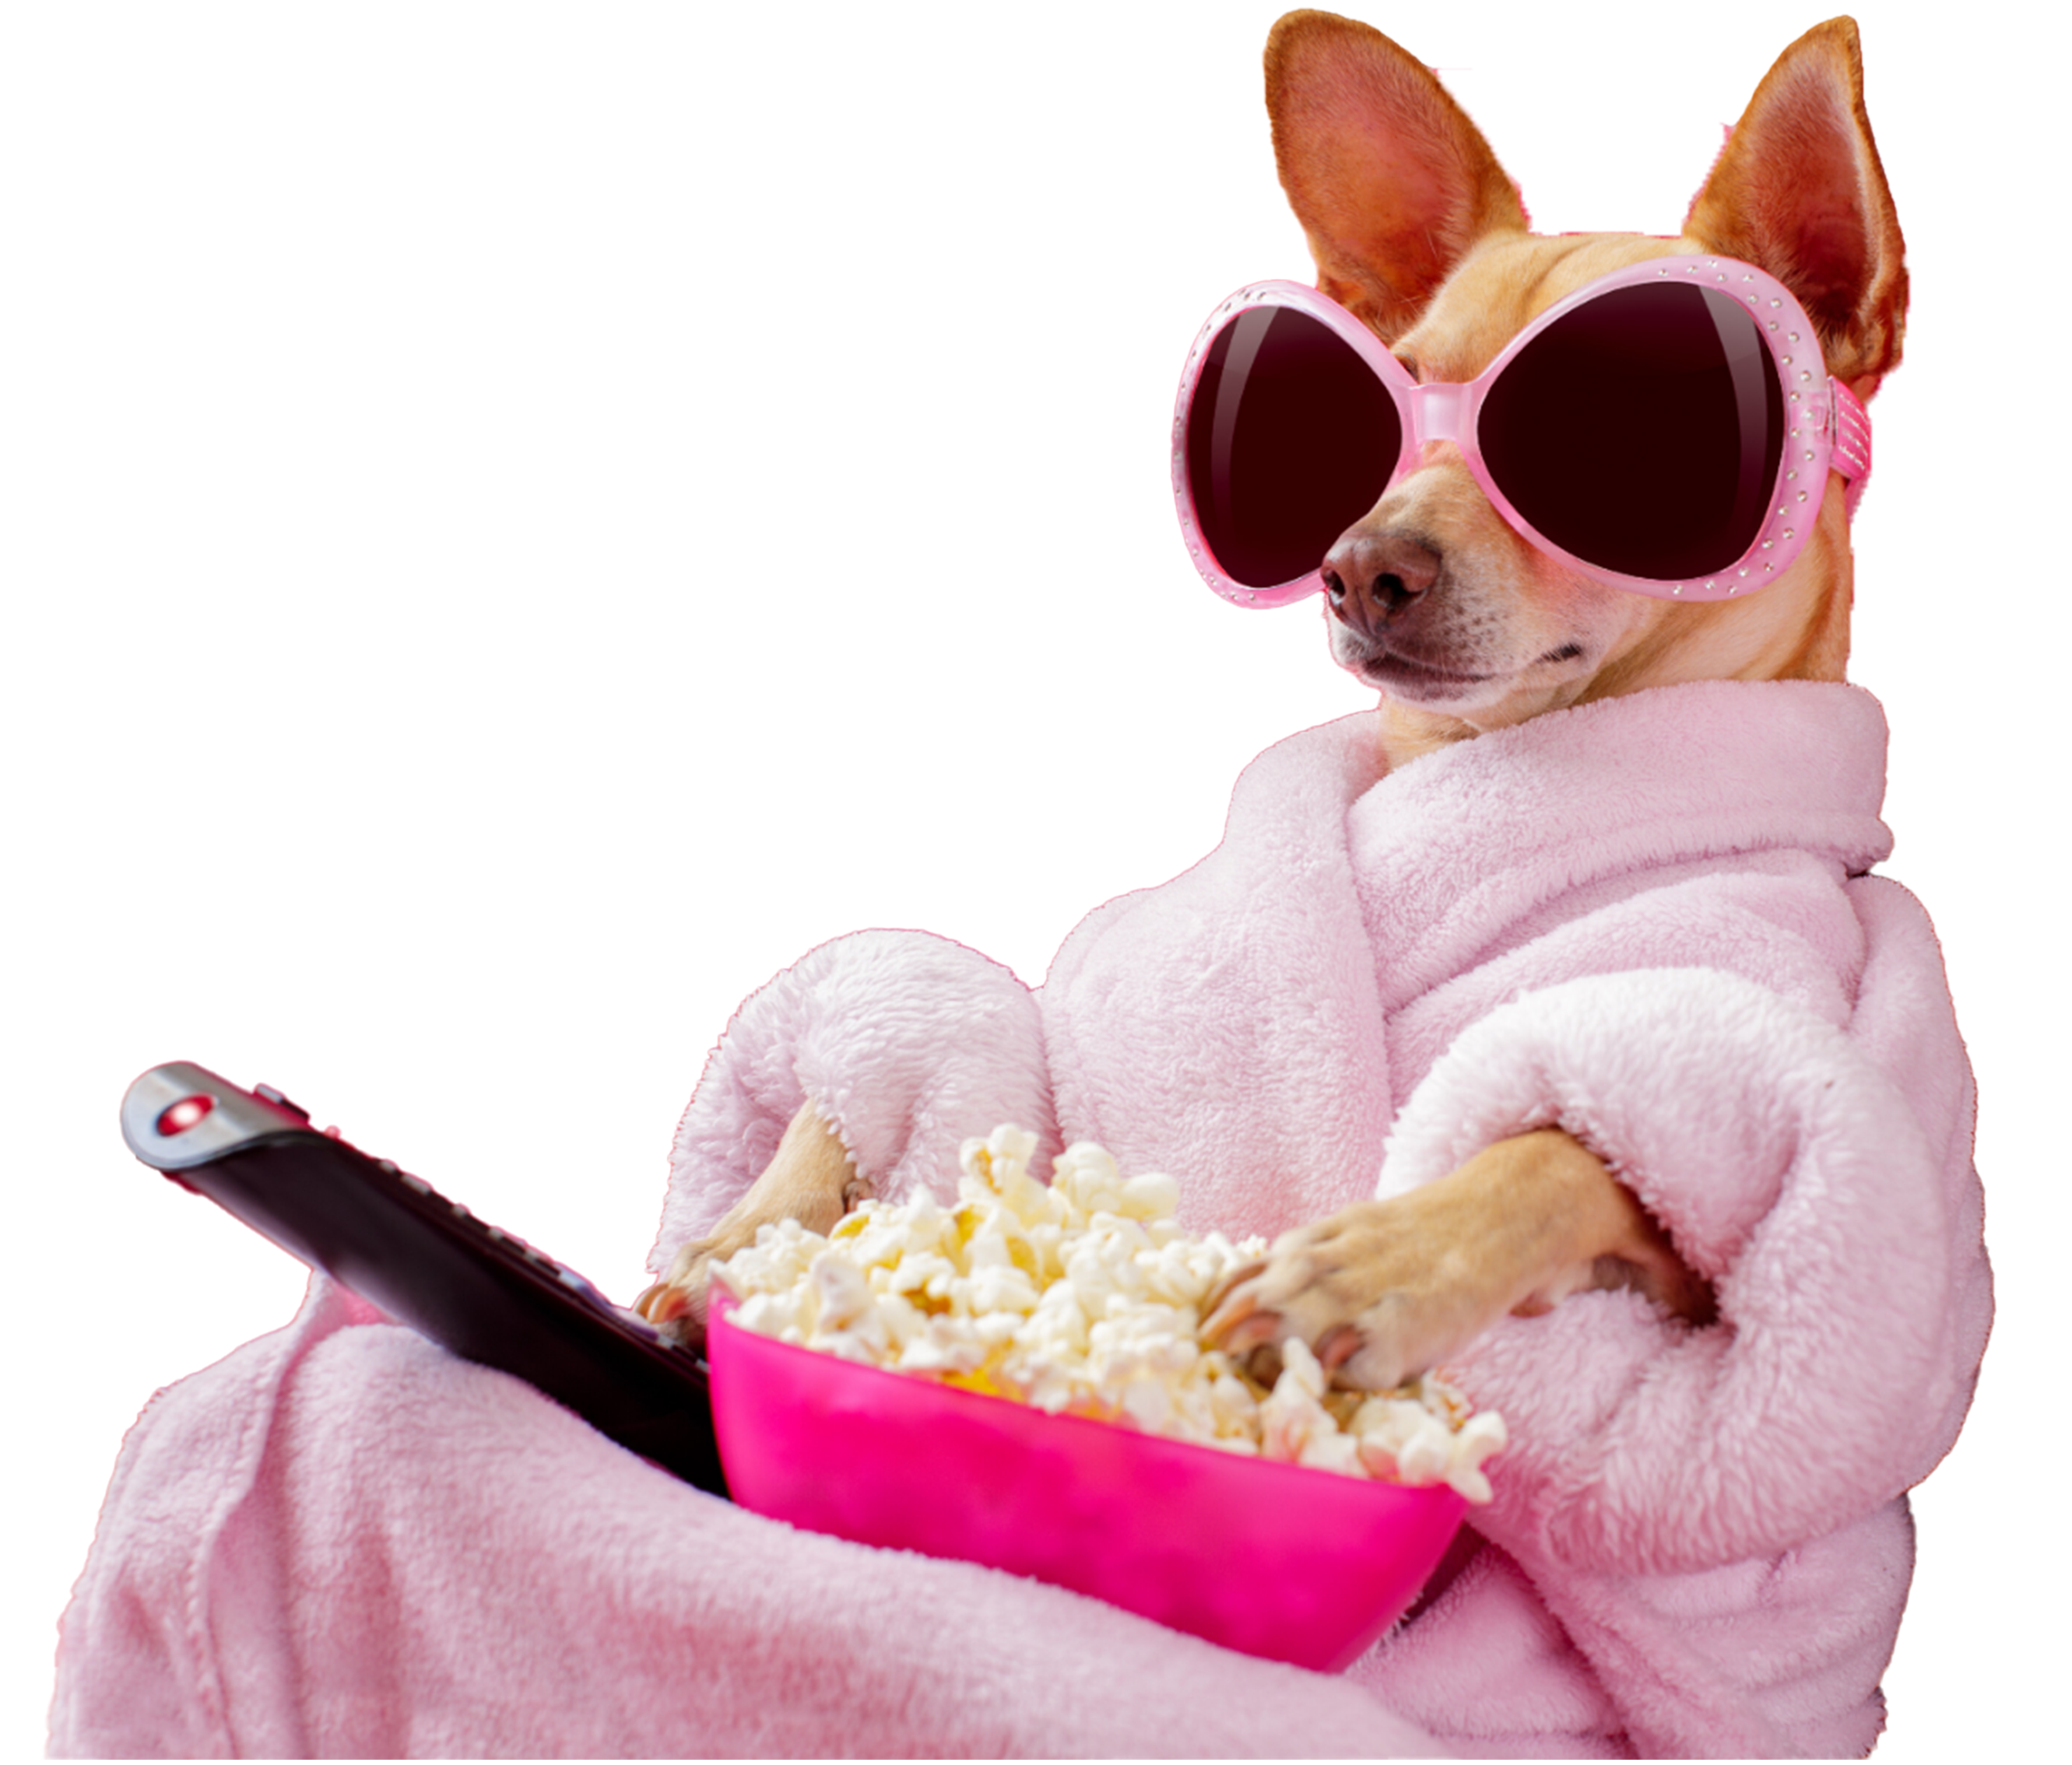 Dog holding popcorn and a remote control